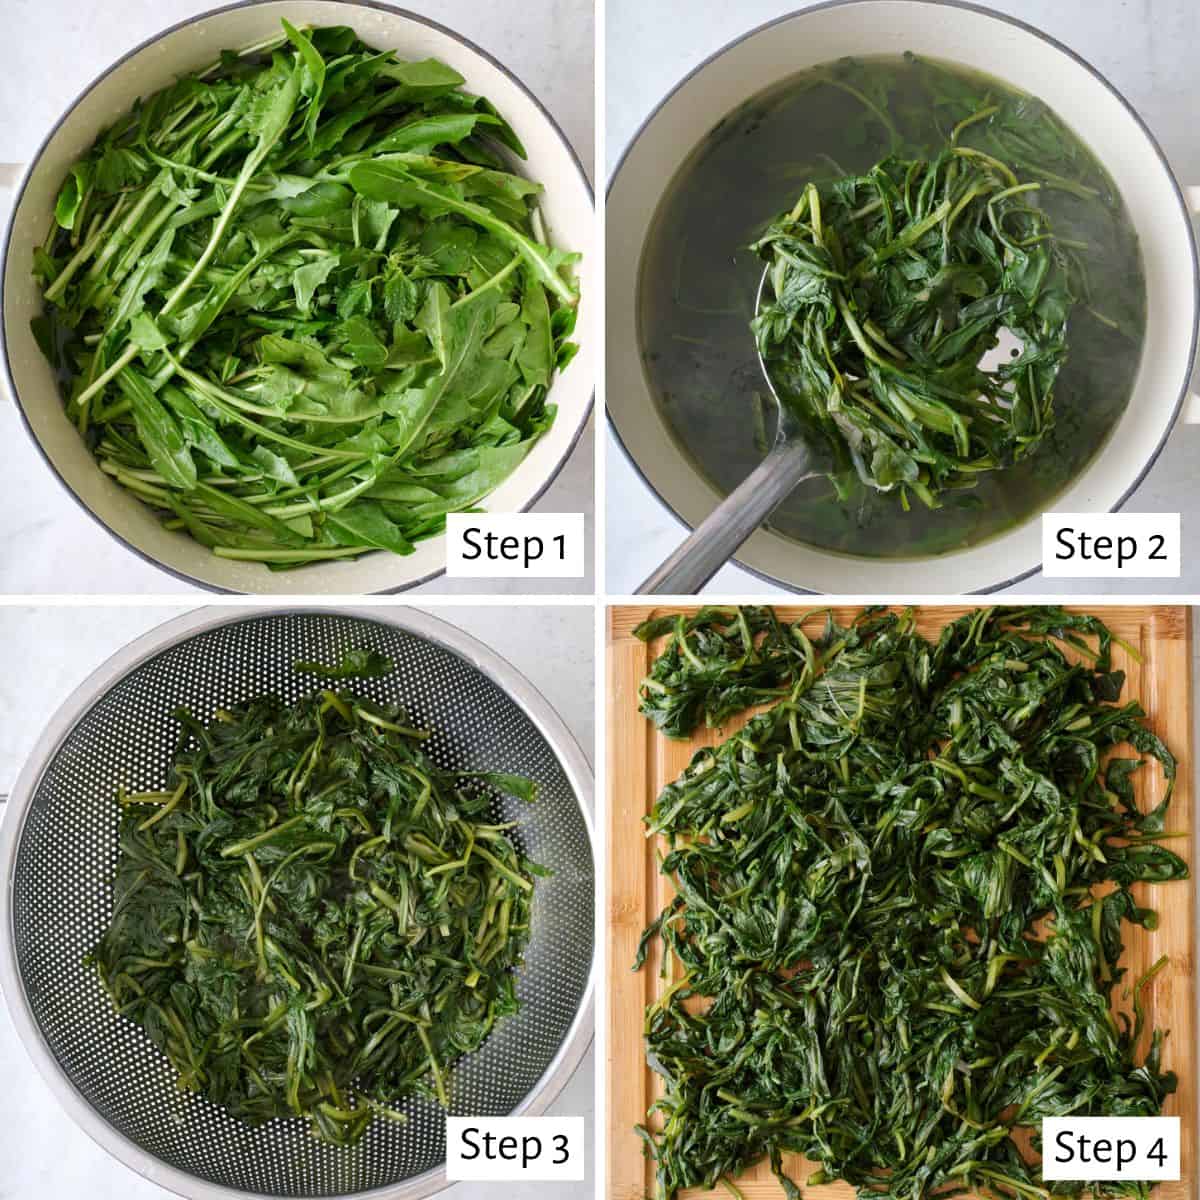 4 image collage making recipe: 1- fresh trimmed dandelion greens in a large pot, 2- after cooking with a ladle lifting some out of the hot water, 3- greens in a strainer, 4- on a cutting board after being chopped.